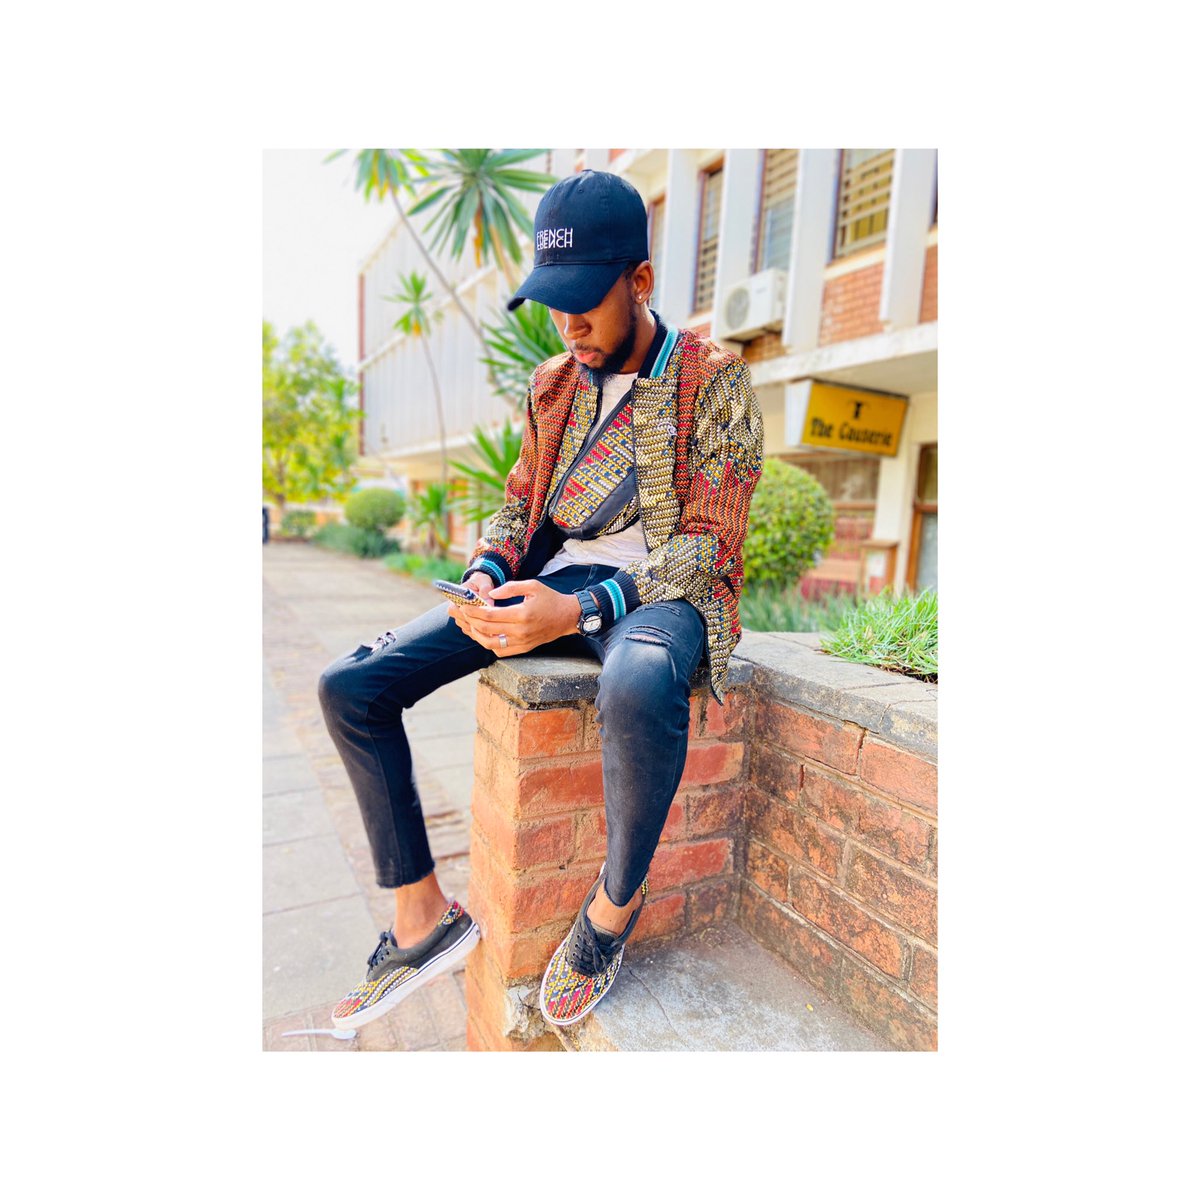 Get a jacket like this made for only Mk 15,000 made by AR Clothing and funny pack & custom shoes for only Mk5,000 each made by @fc_crafts 
.
.
.#collaboration #lookgoodtofeelgood💯#Ankaradesigns #buymalawian